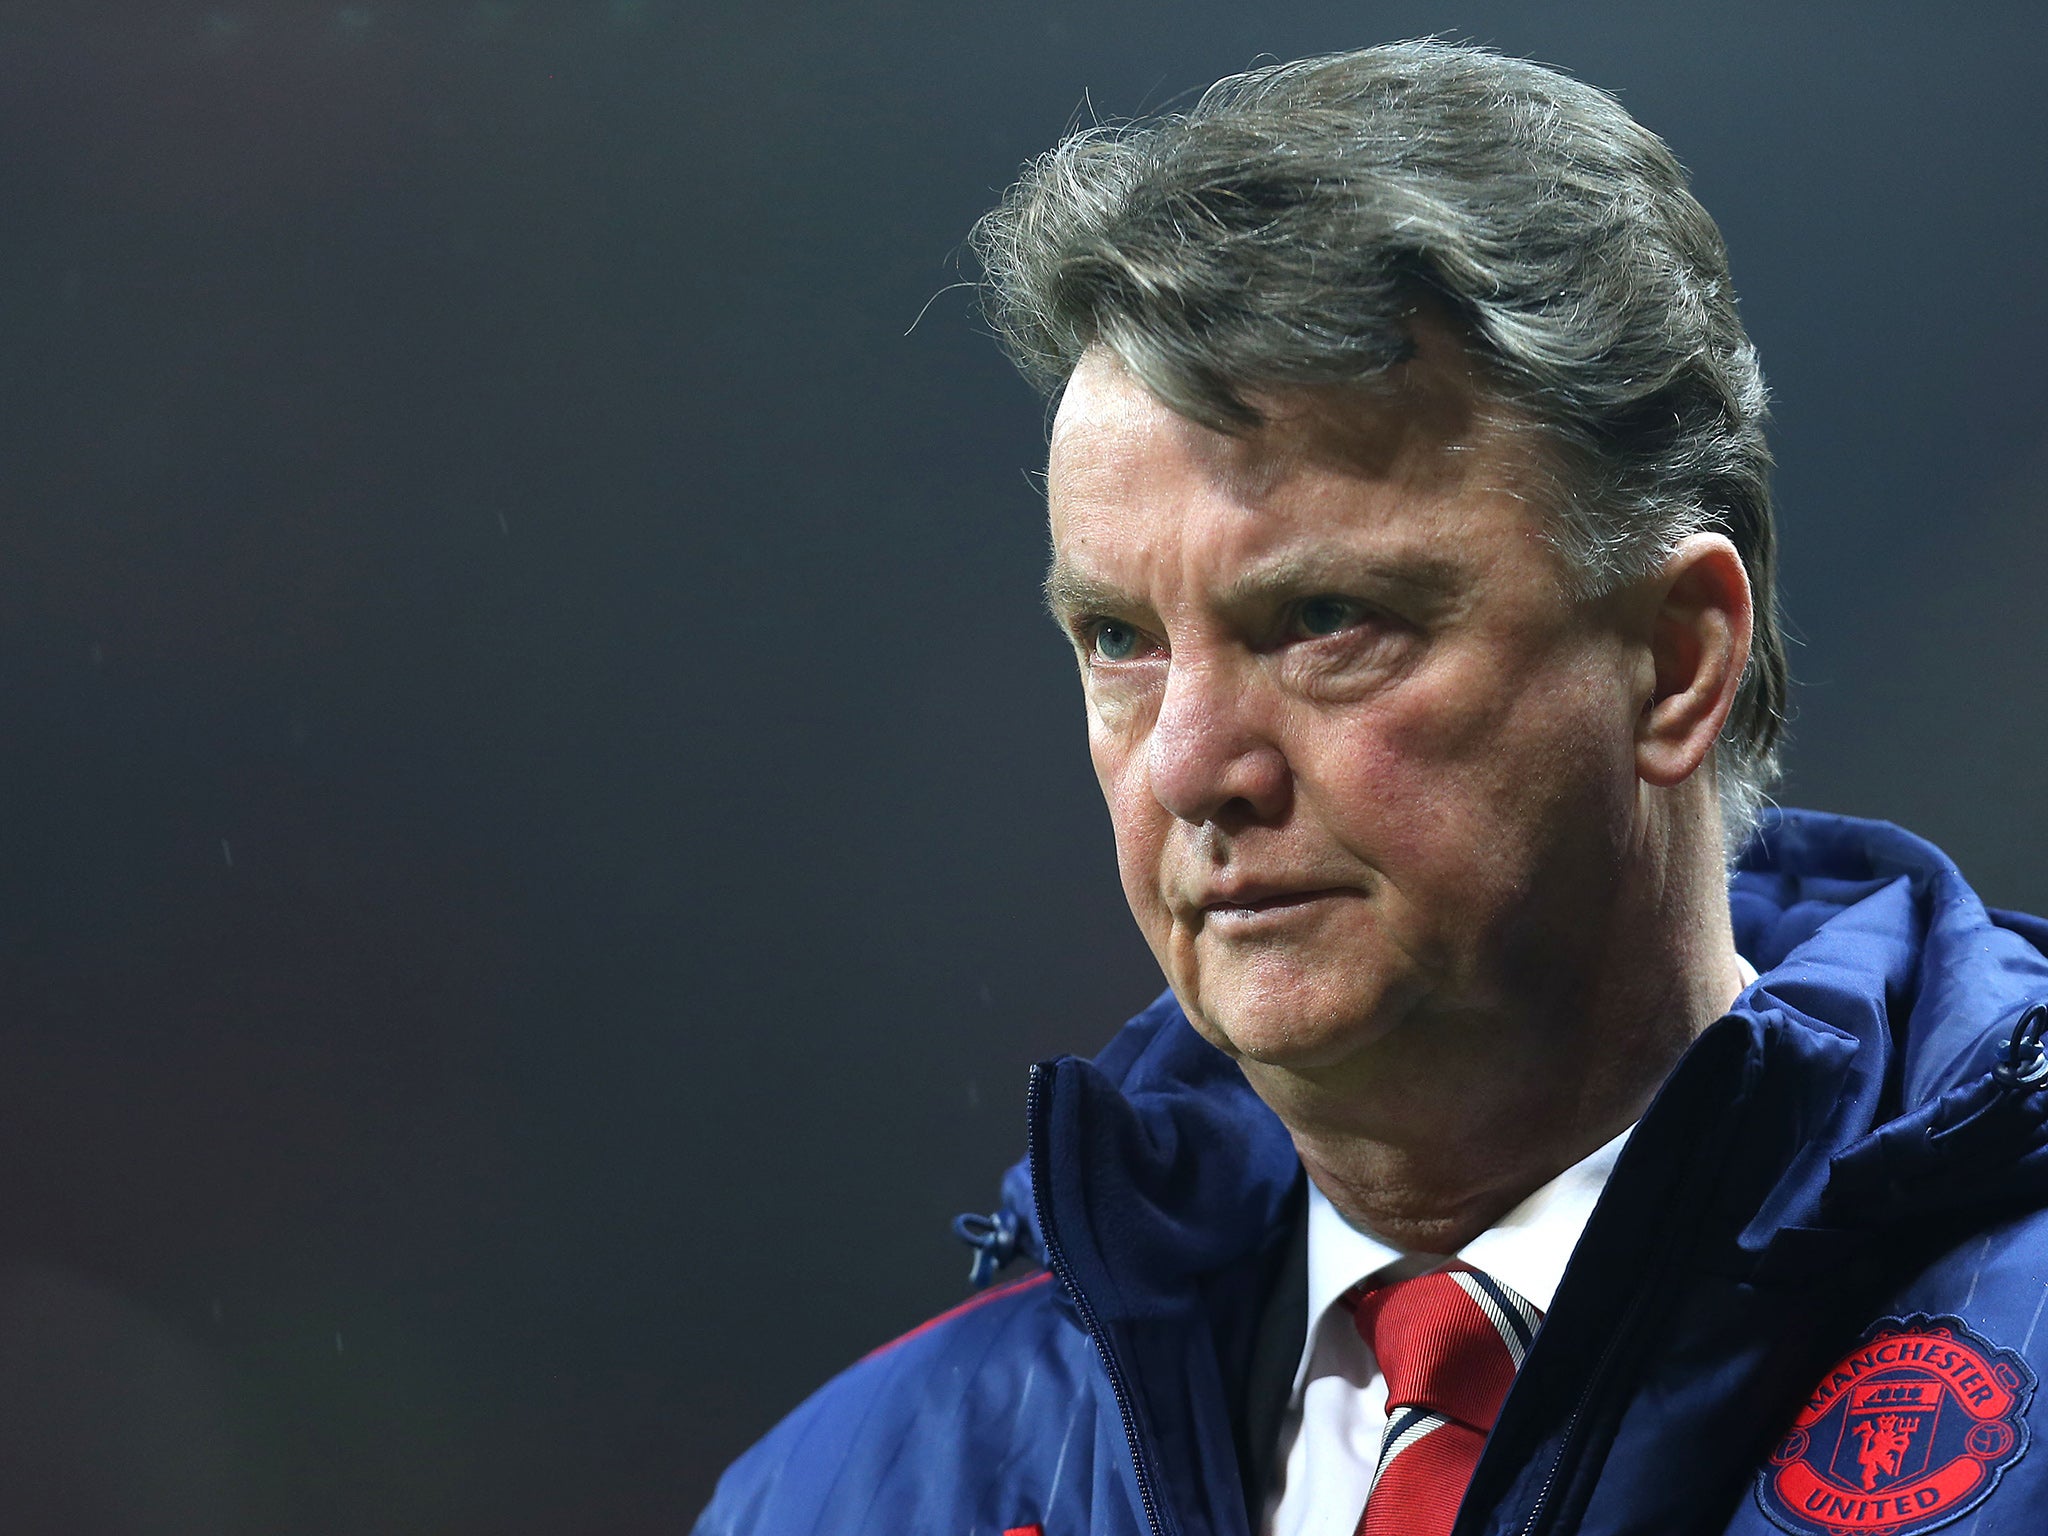 Louis van Gaal looks on after Manchester United's most recent defeat on Sunday